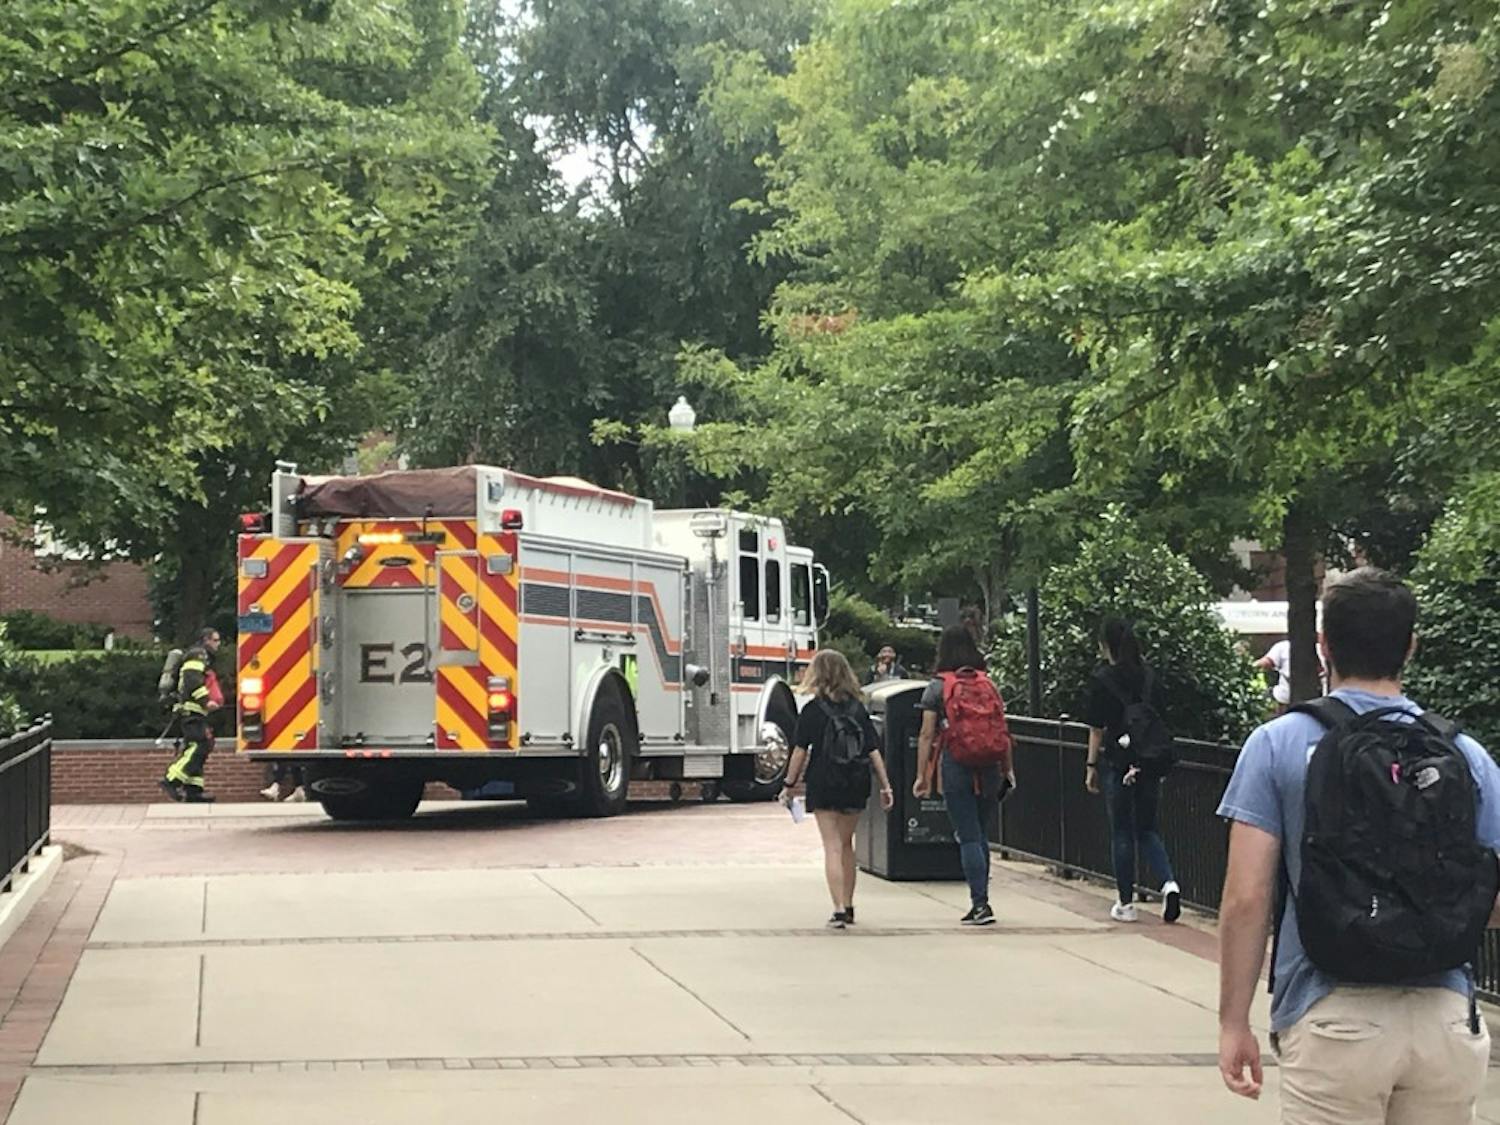 Fire truck at Student Center 8-19-19